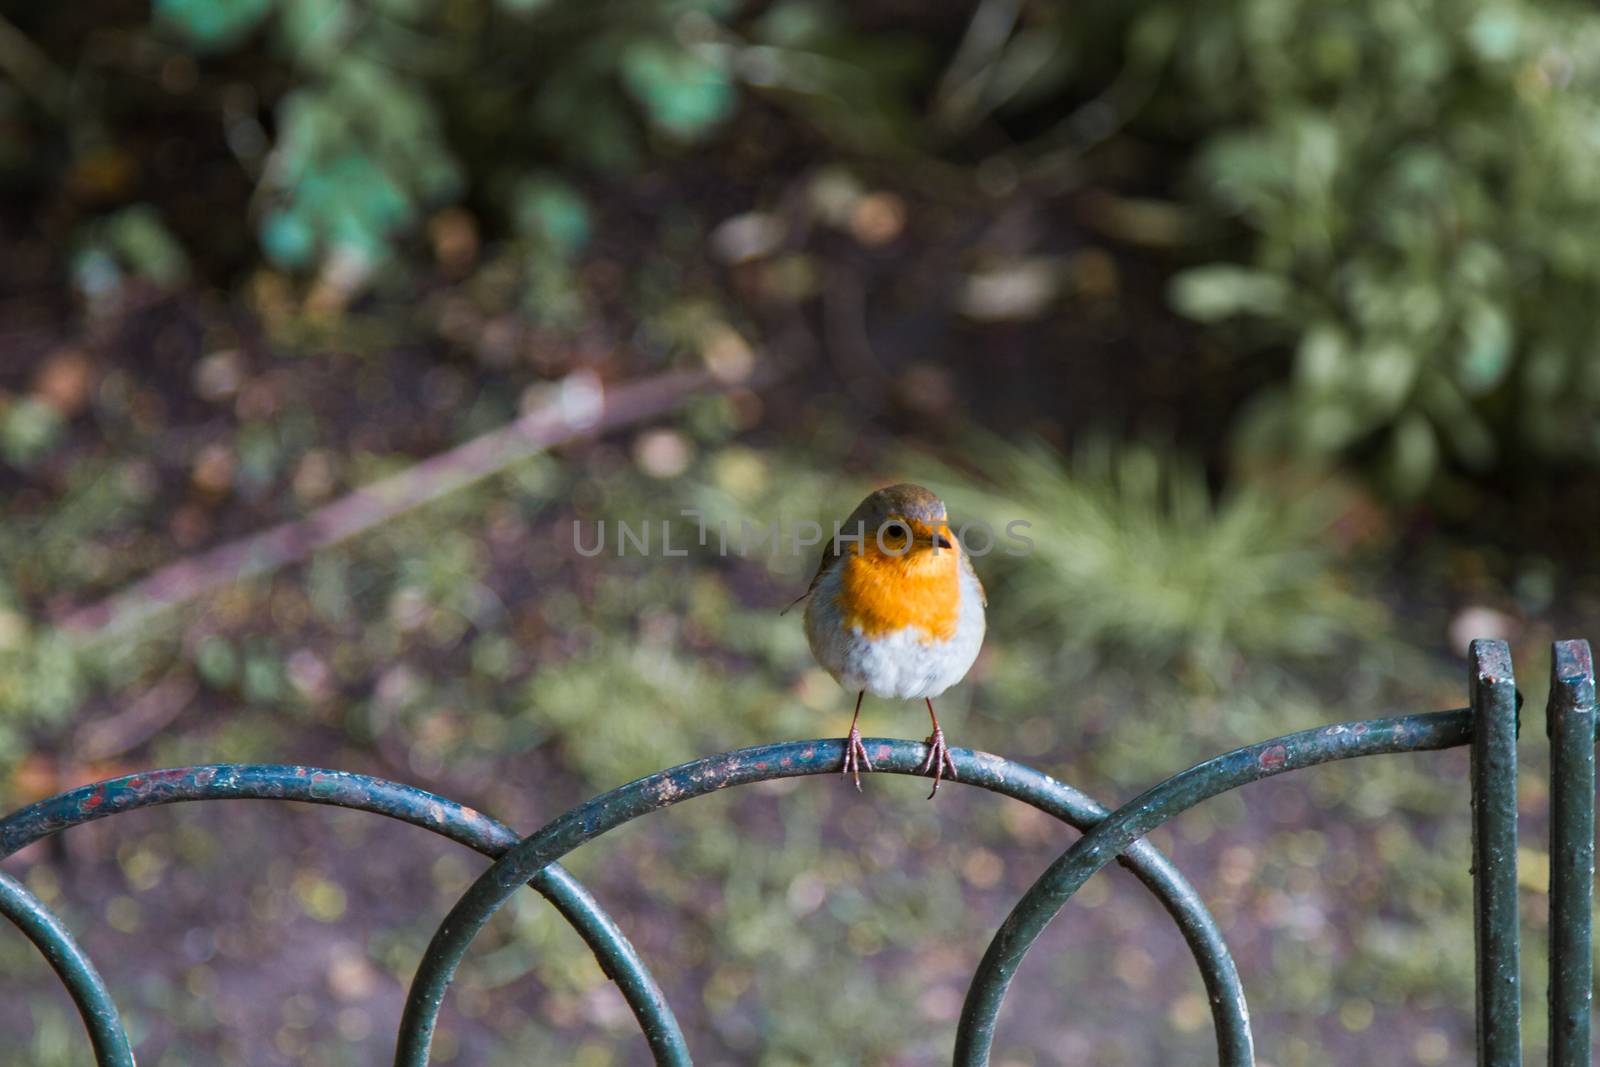 A robin on some railings